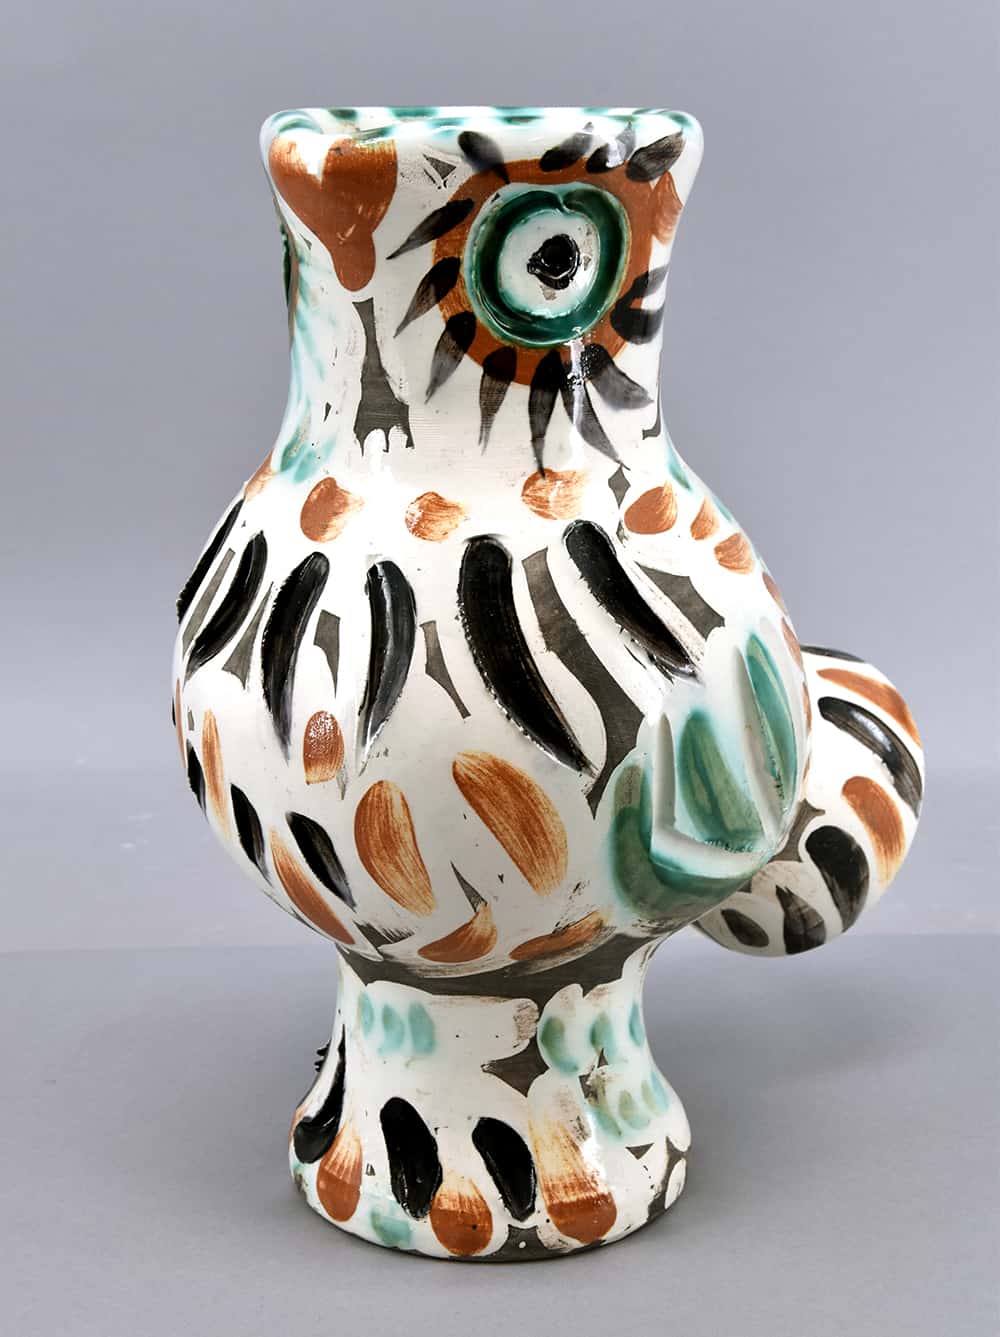 Pablo Picasso, Chouette (Wood-Owl), 1969 A.R. 602